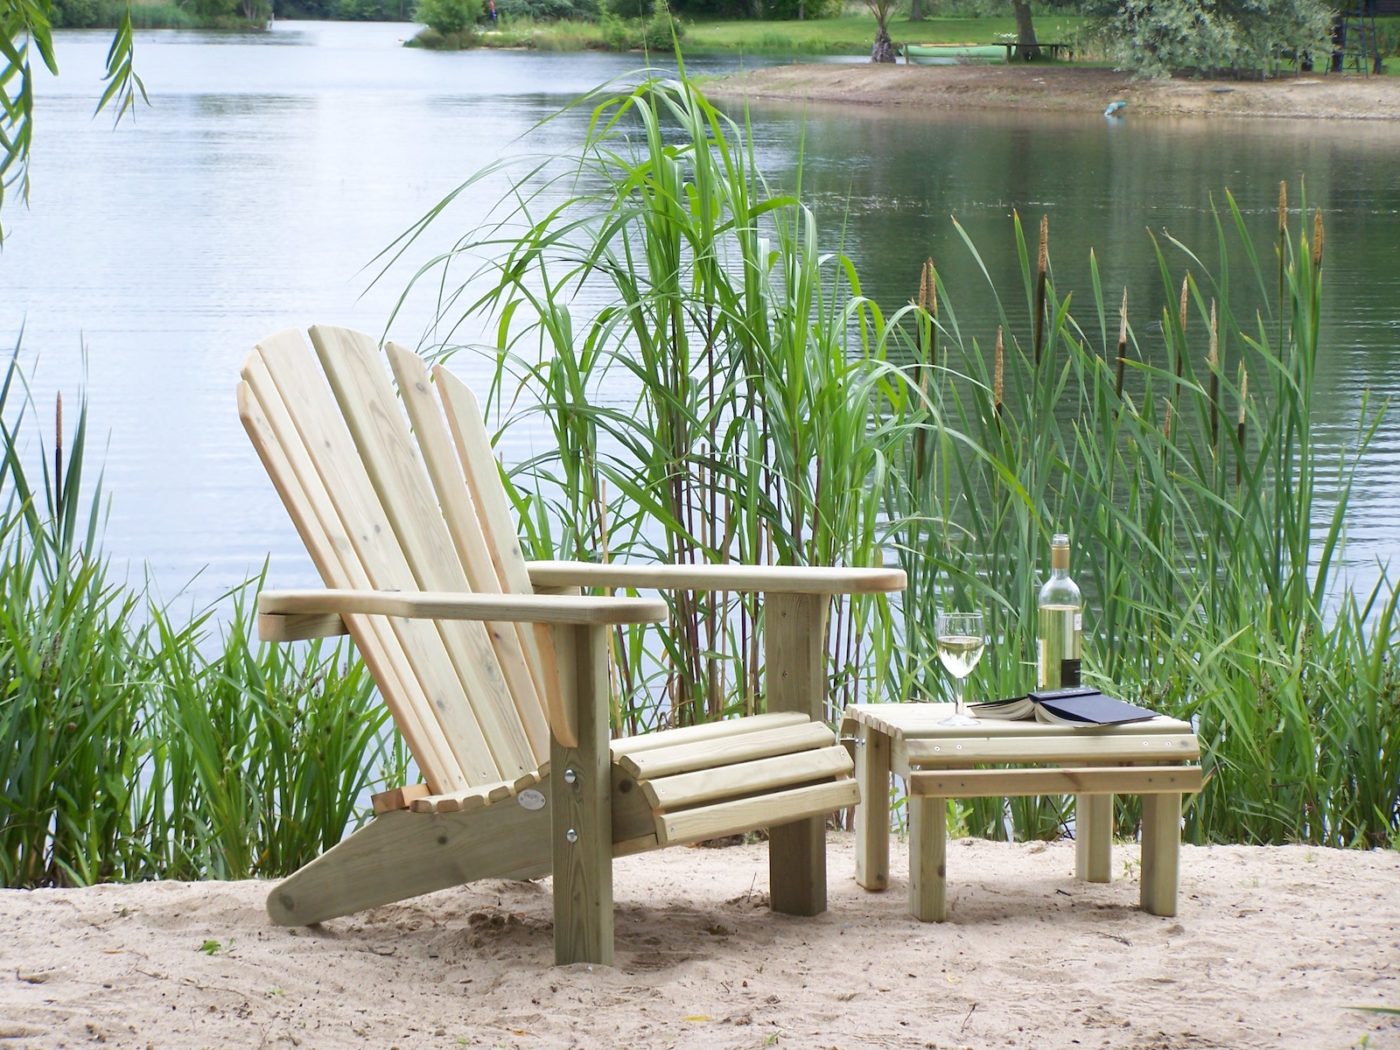 Pepe - Garden Furniture for Hotels, Outdoor Hotel Furniture